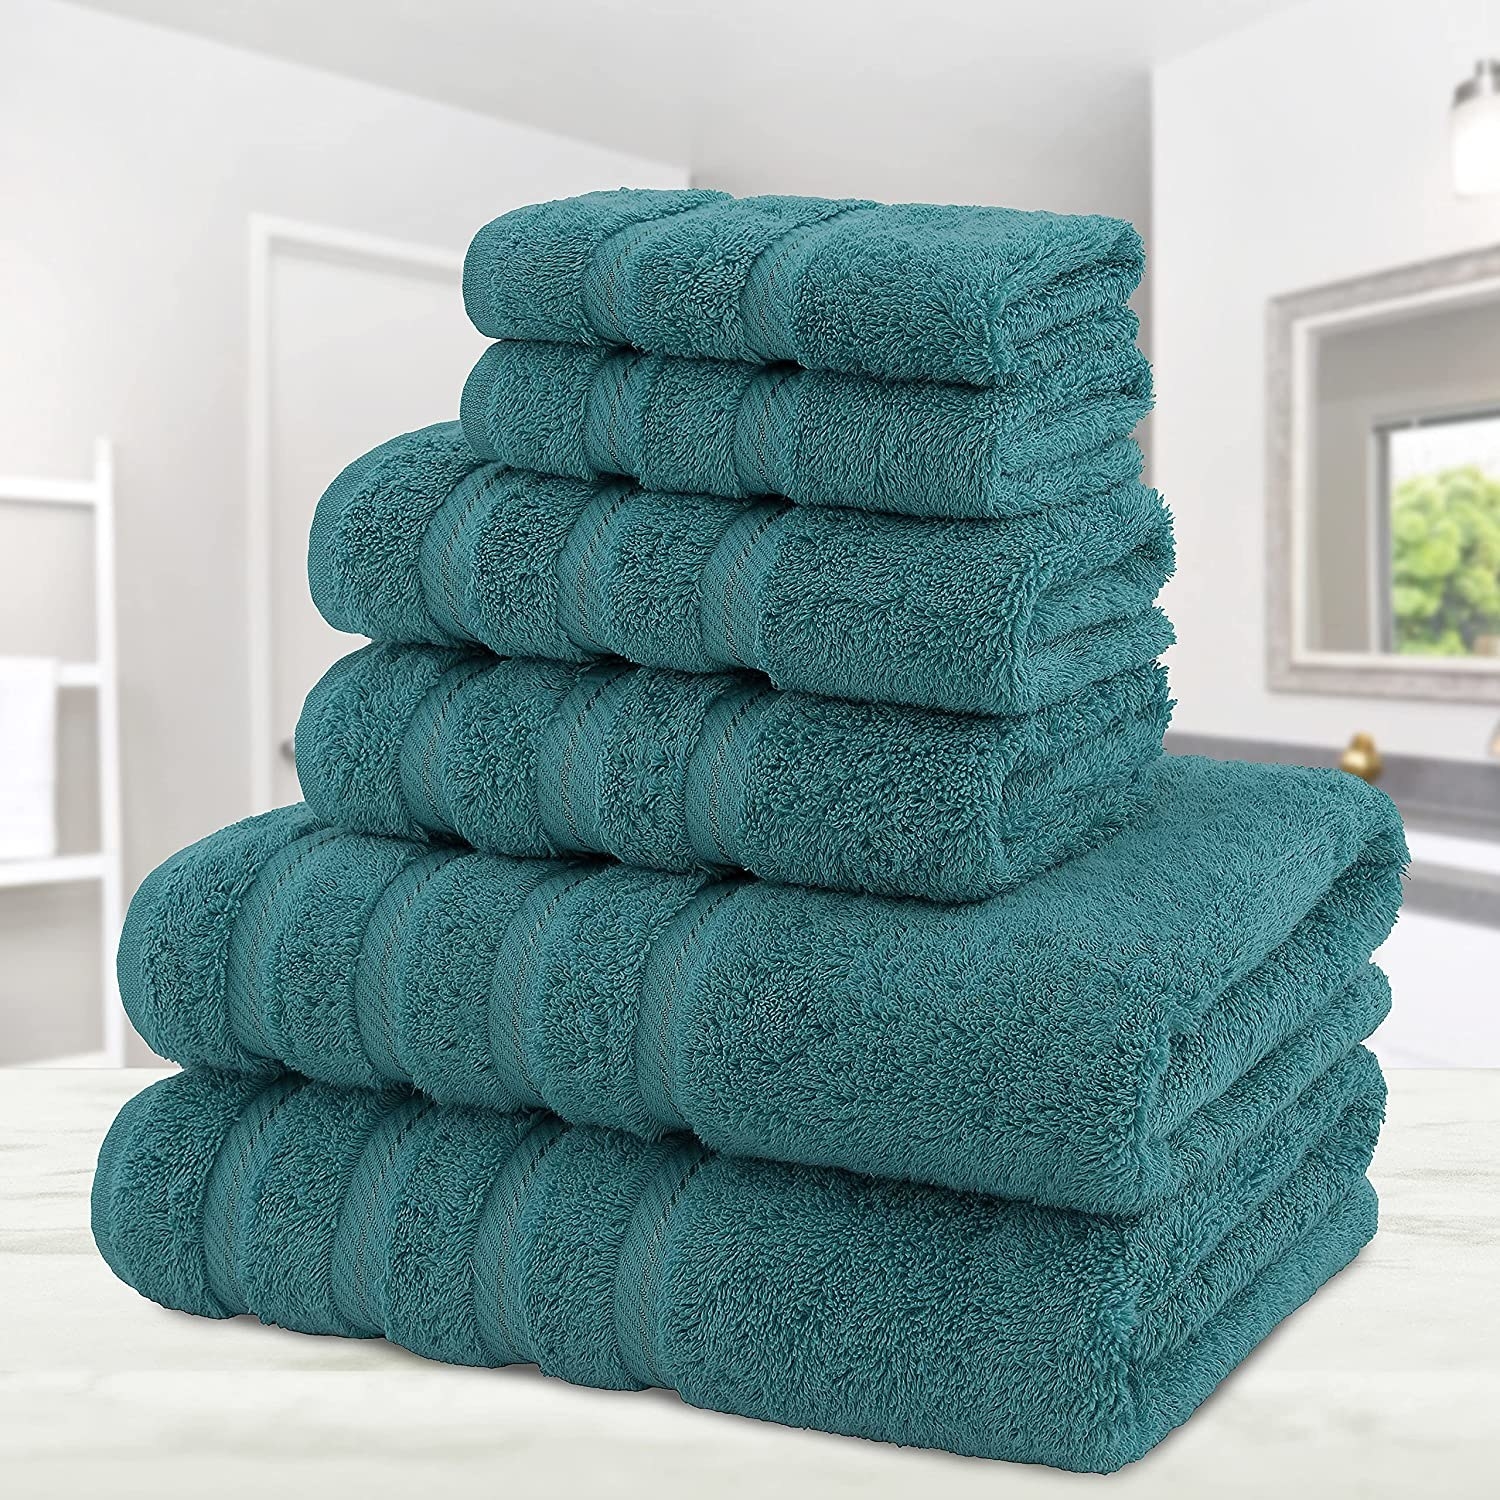 the towel set in colonial blue